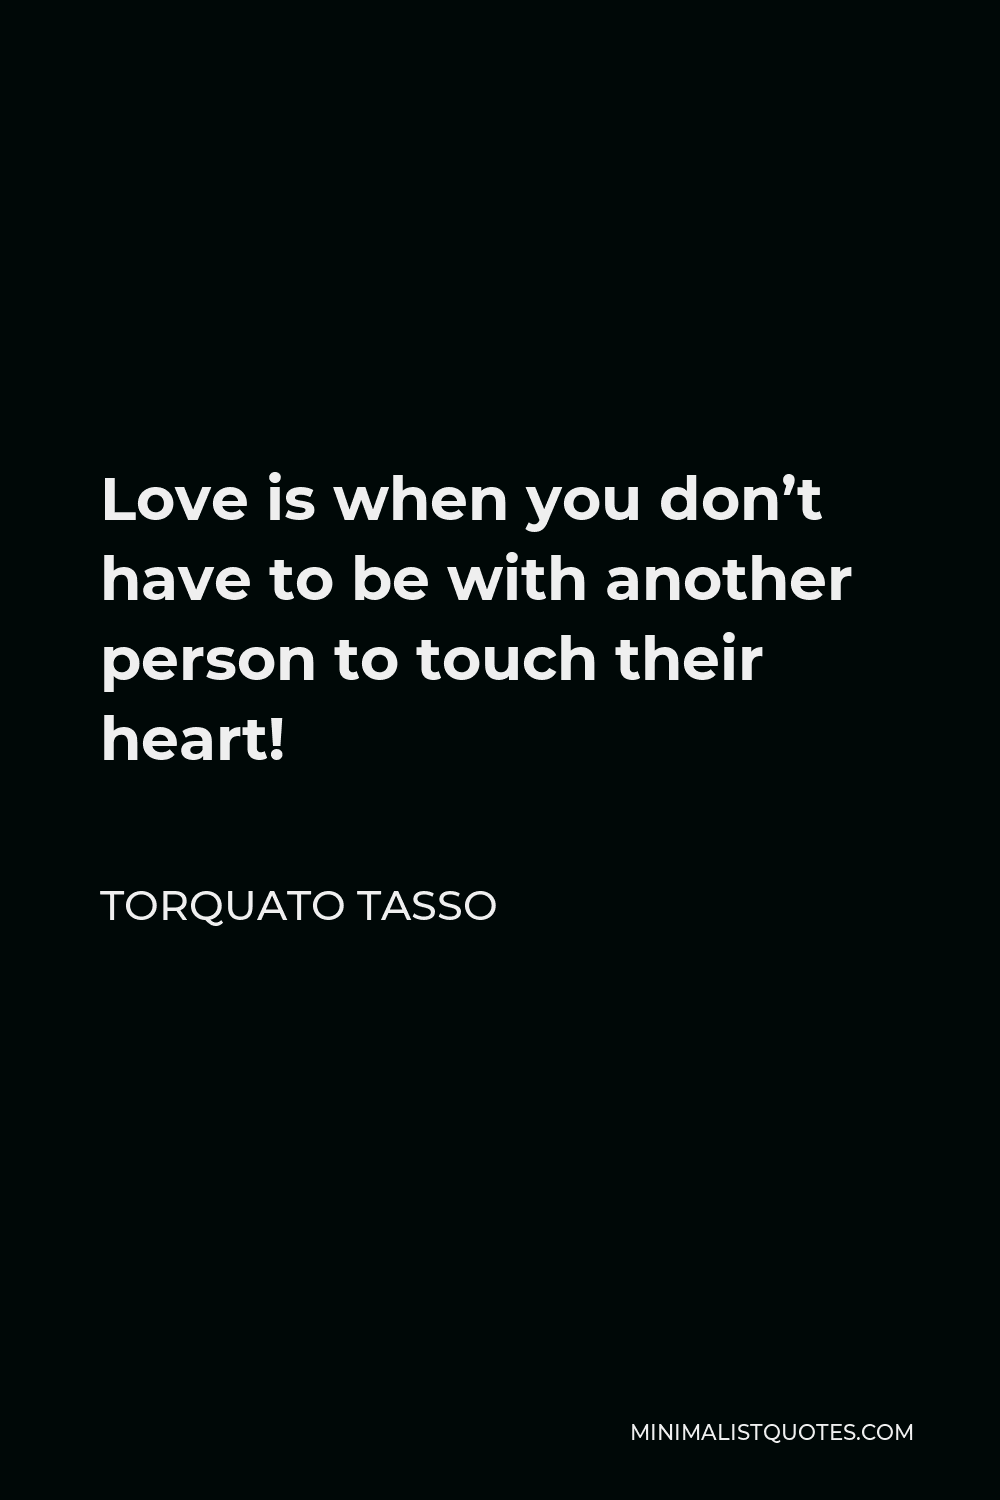 Torquato Tasso Quote - Love is when you don’t have to be with another person to touch their heart!